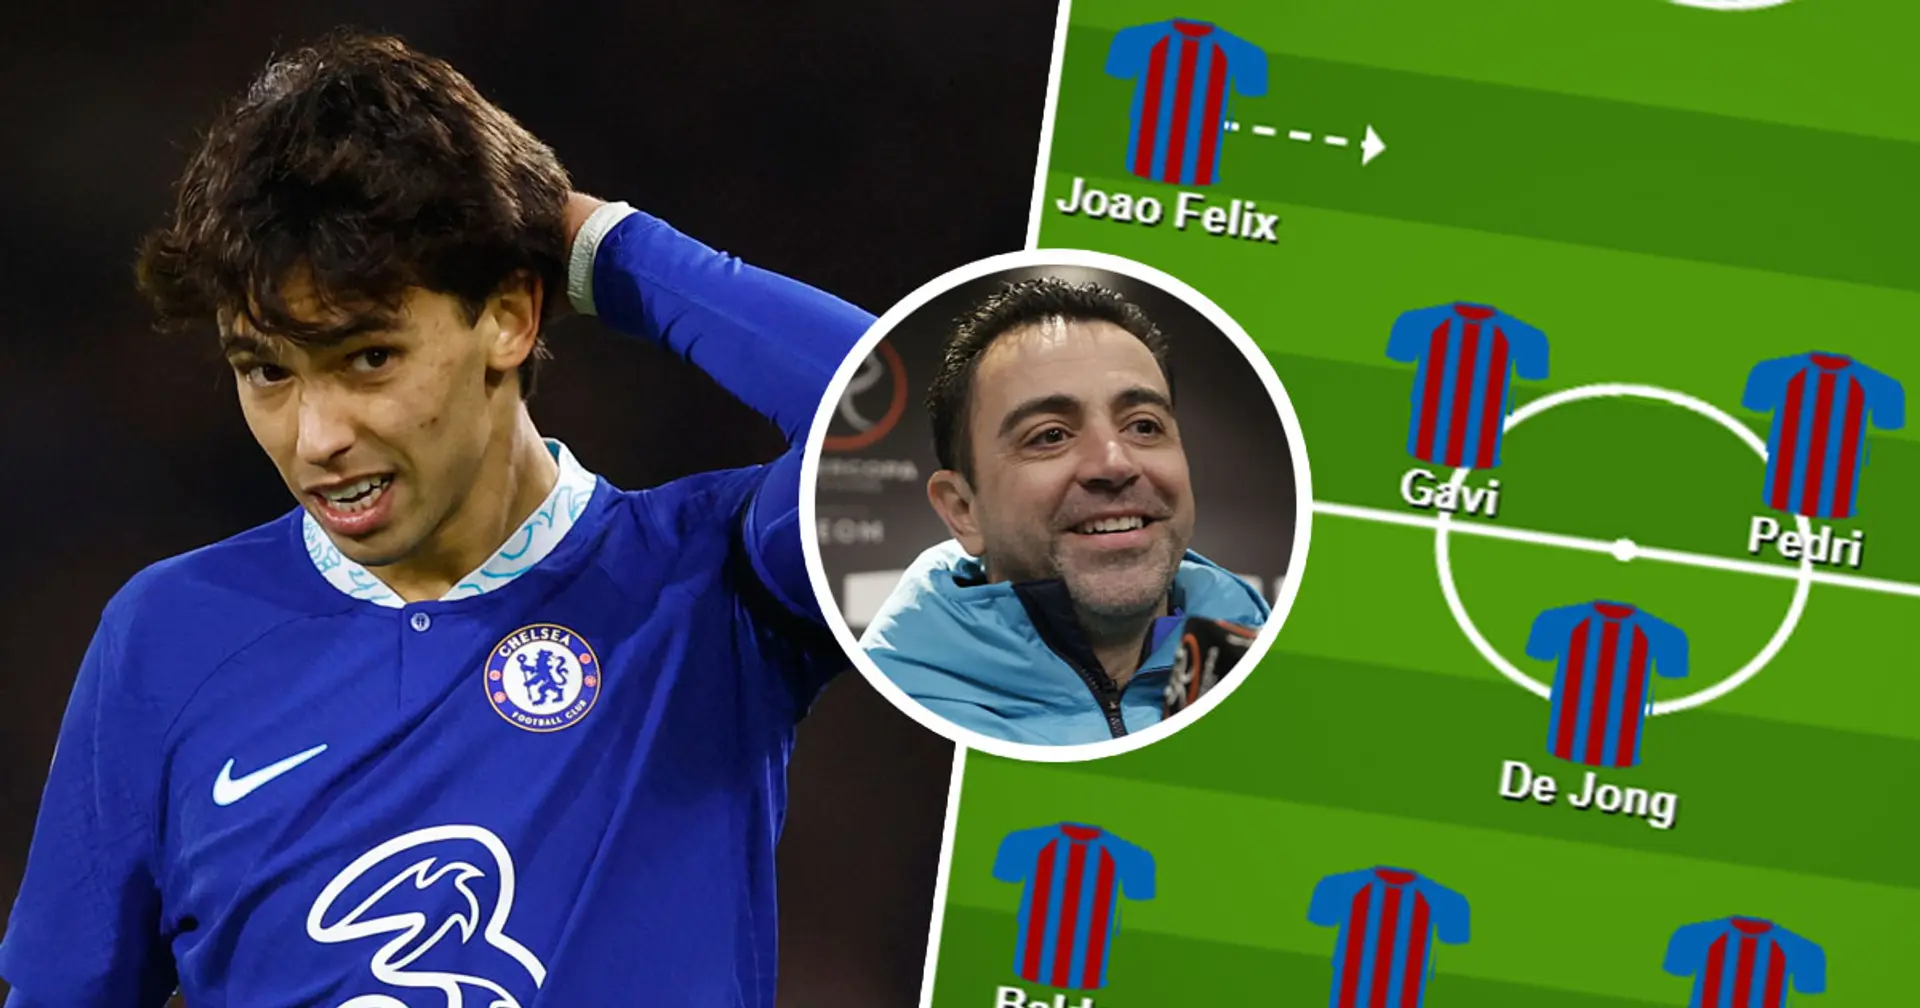 Shown in lineup: how Barca plan to use Joao Felix if they sign him next summer